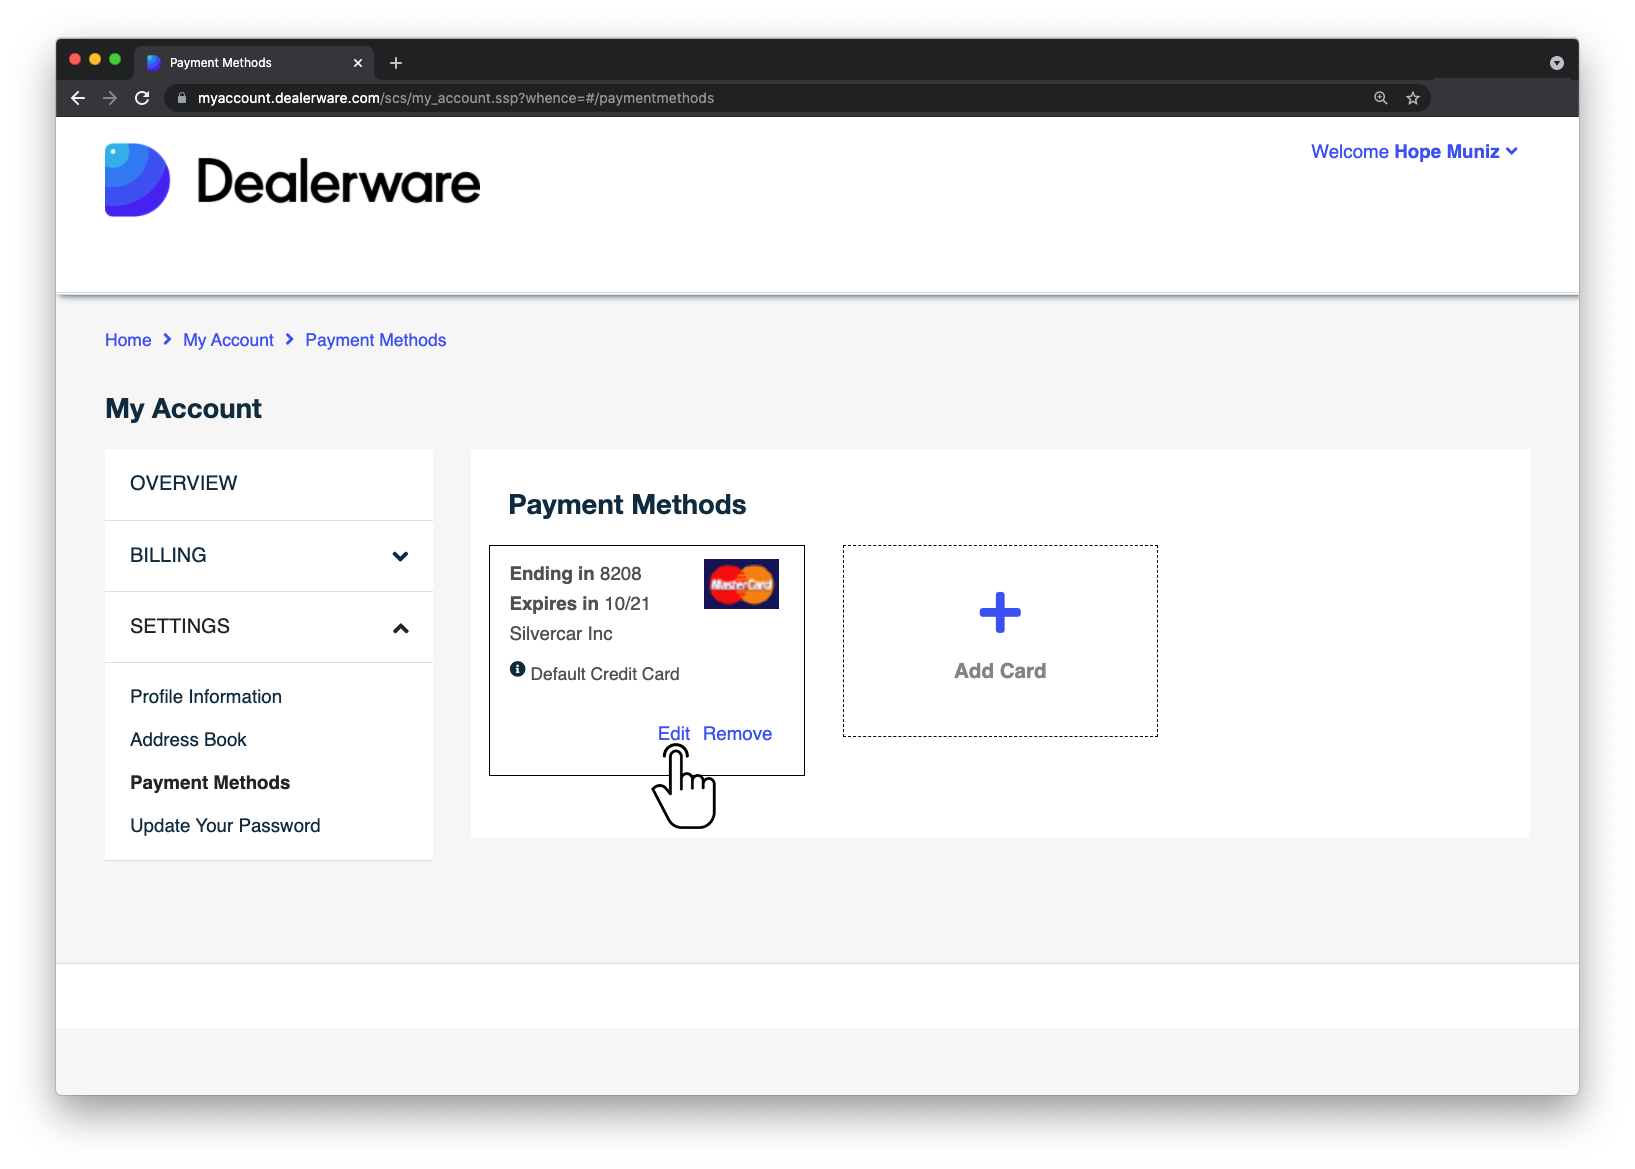 Image 7: Dealerware MyAccount screen, fingertap icon positioned over Edit button in Payment Methods screen